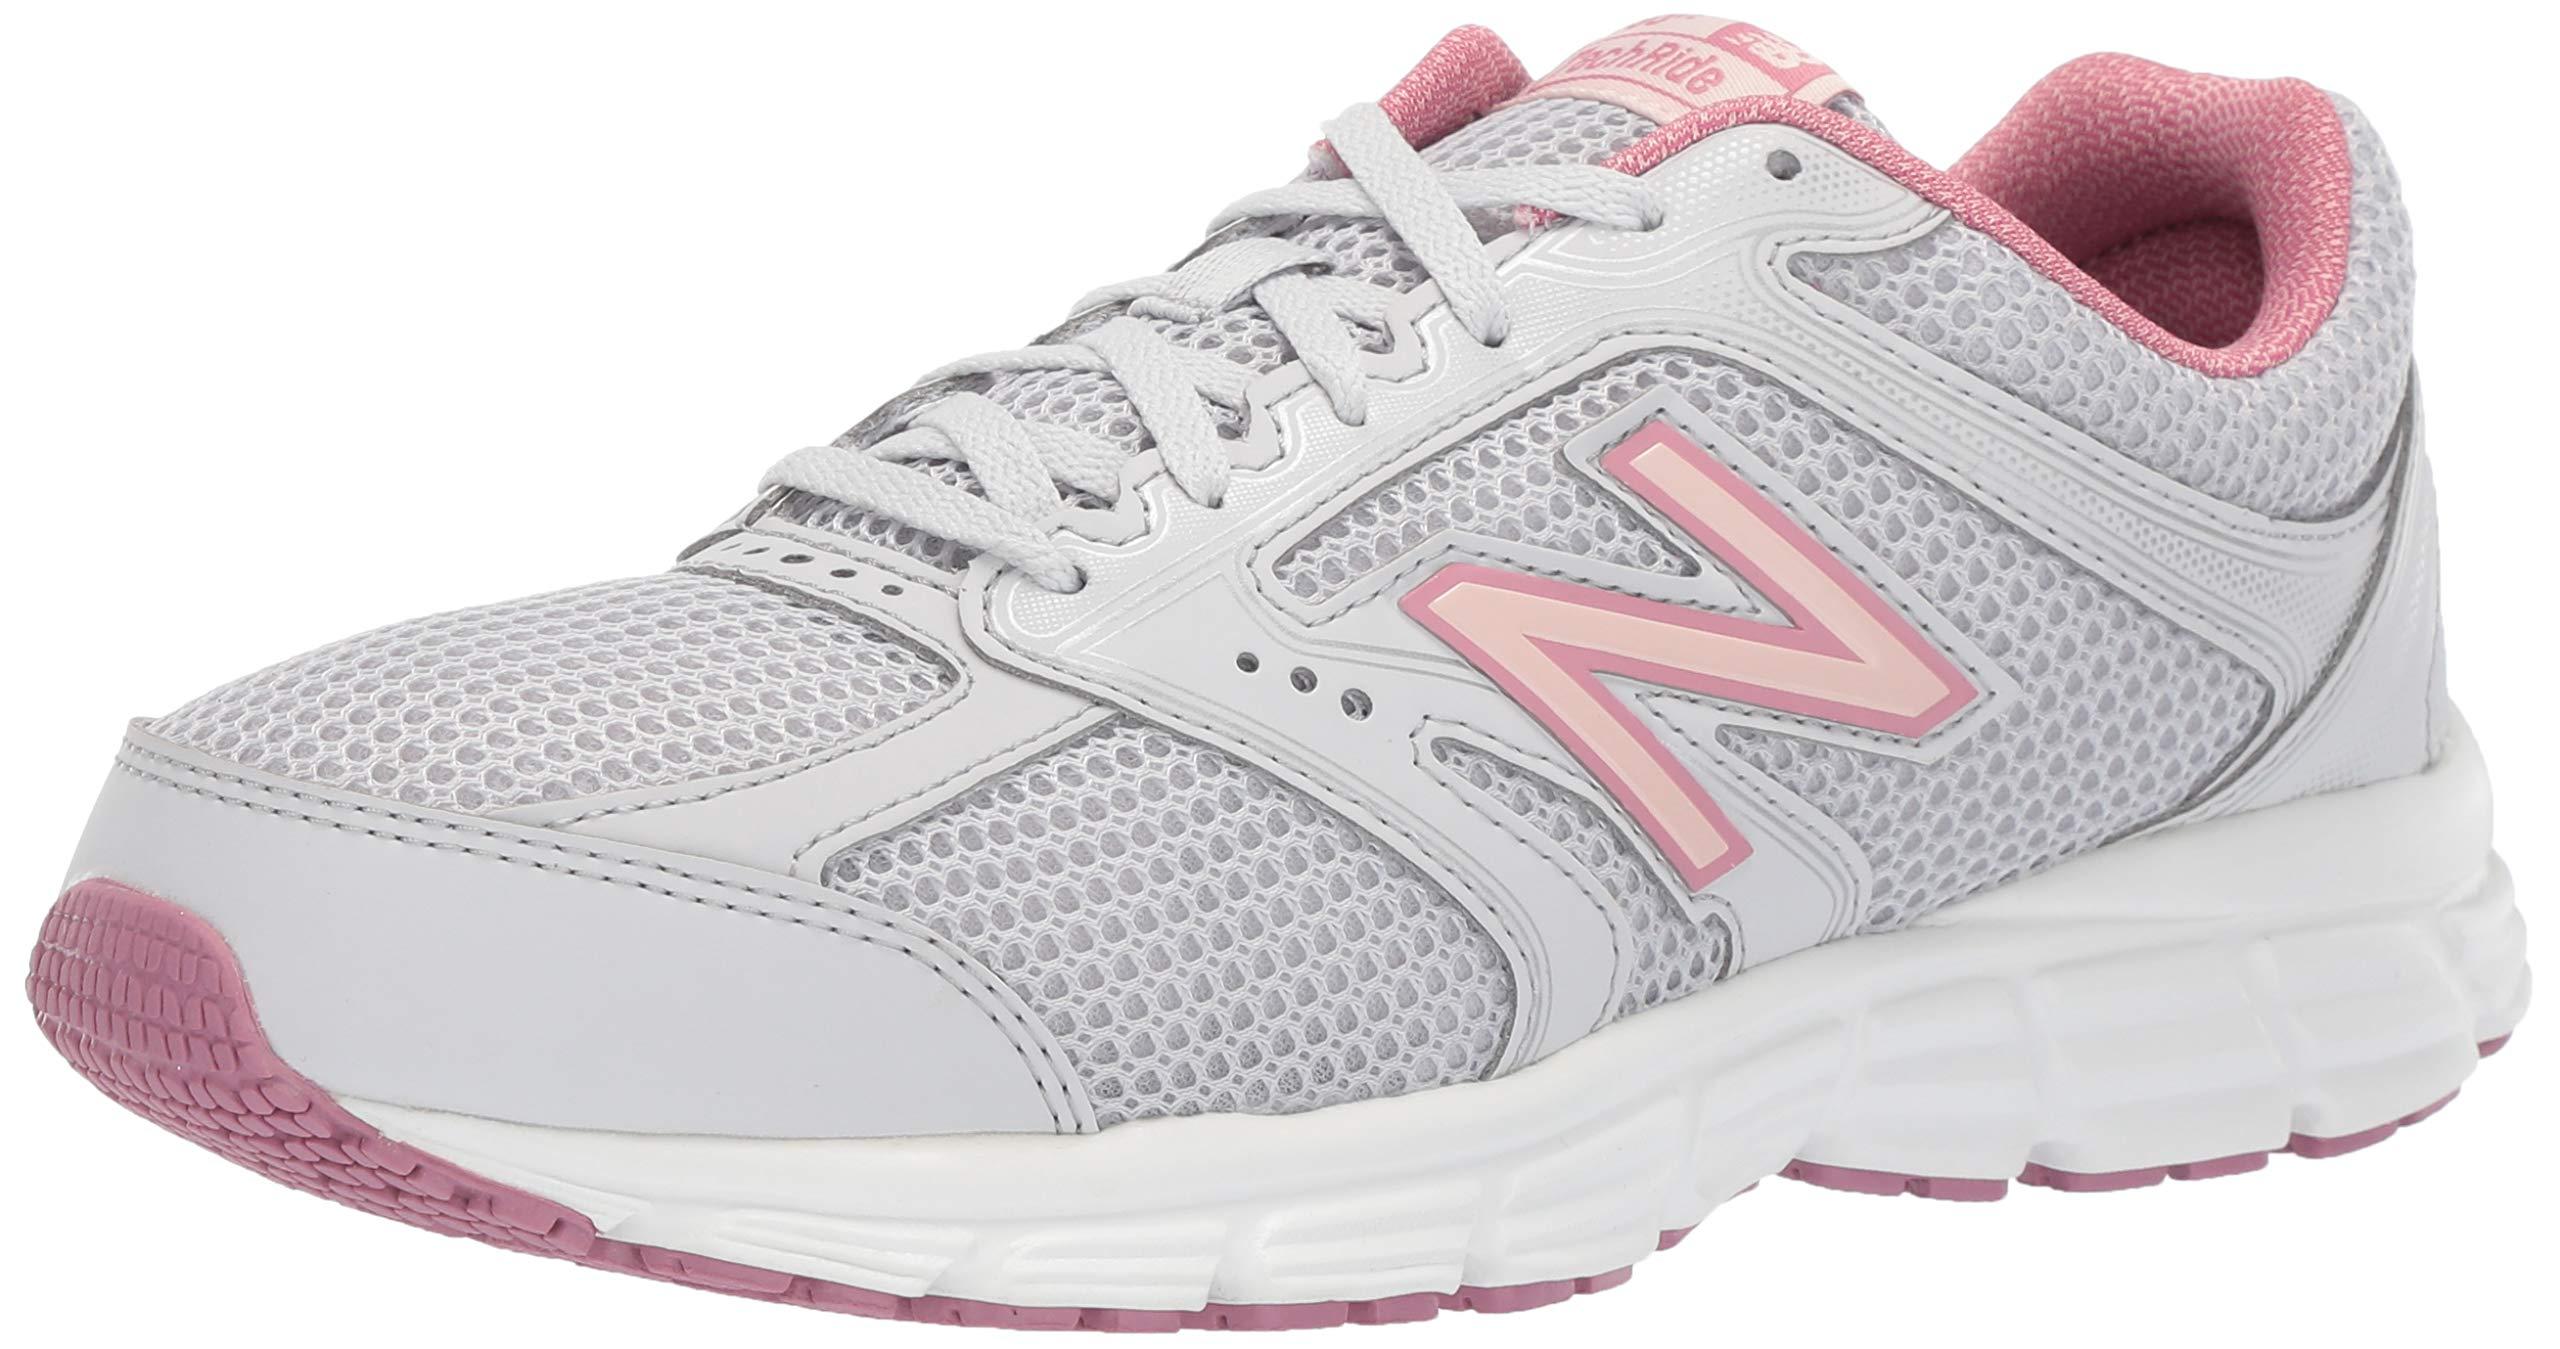 New Balance Synthetic 460v2 Cushioning Running Shoe , Summer Fog/oyster  Pink/mineral Rose , 7.5 W Us | Lyst